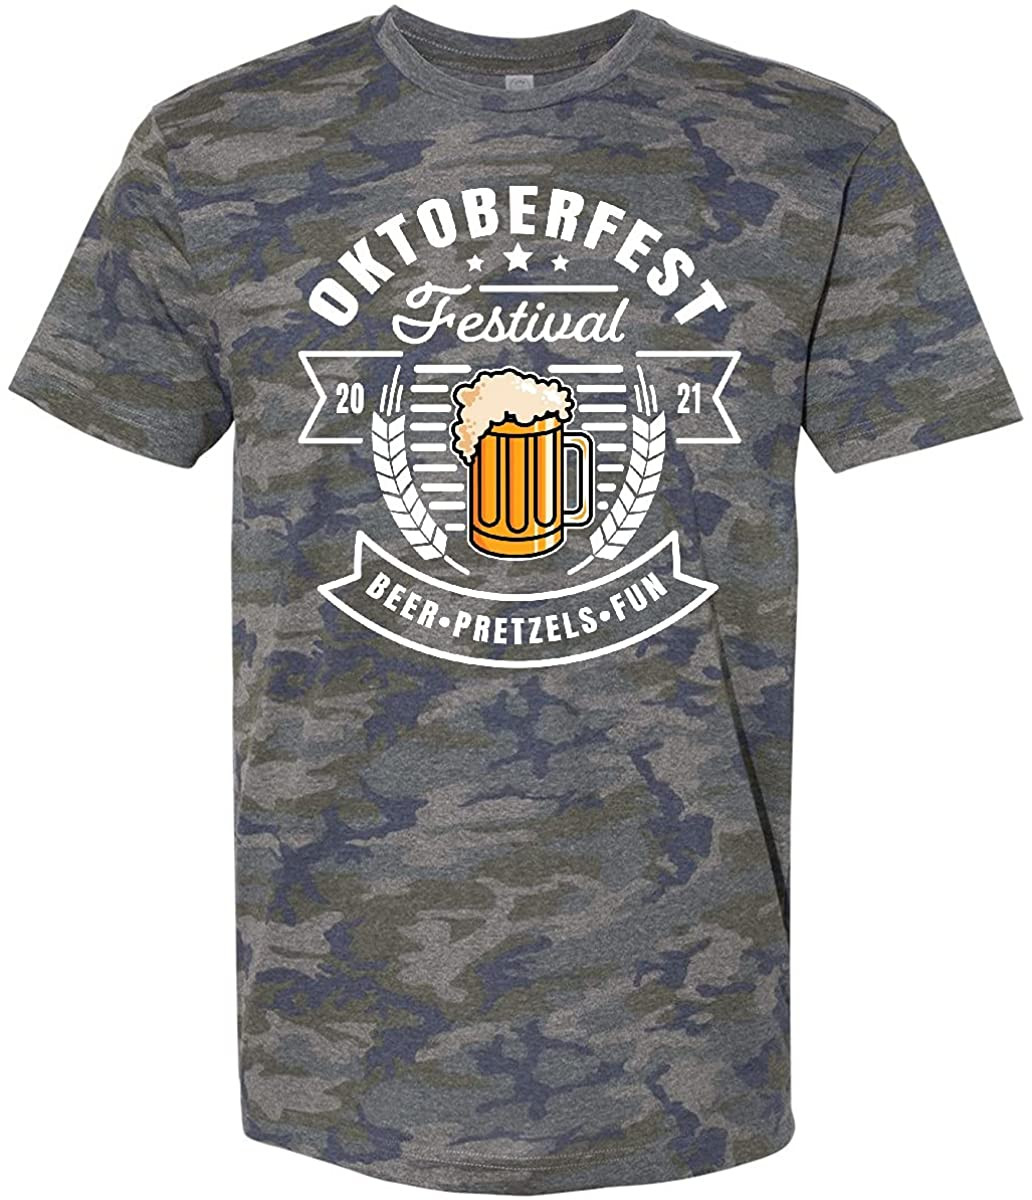 Oktoberfest Festival 2021 With Glass Of Beer T-Shirt